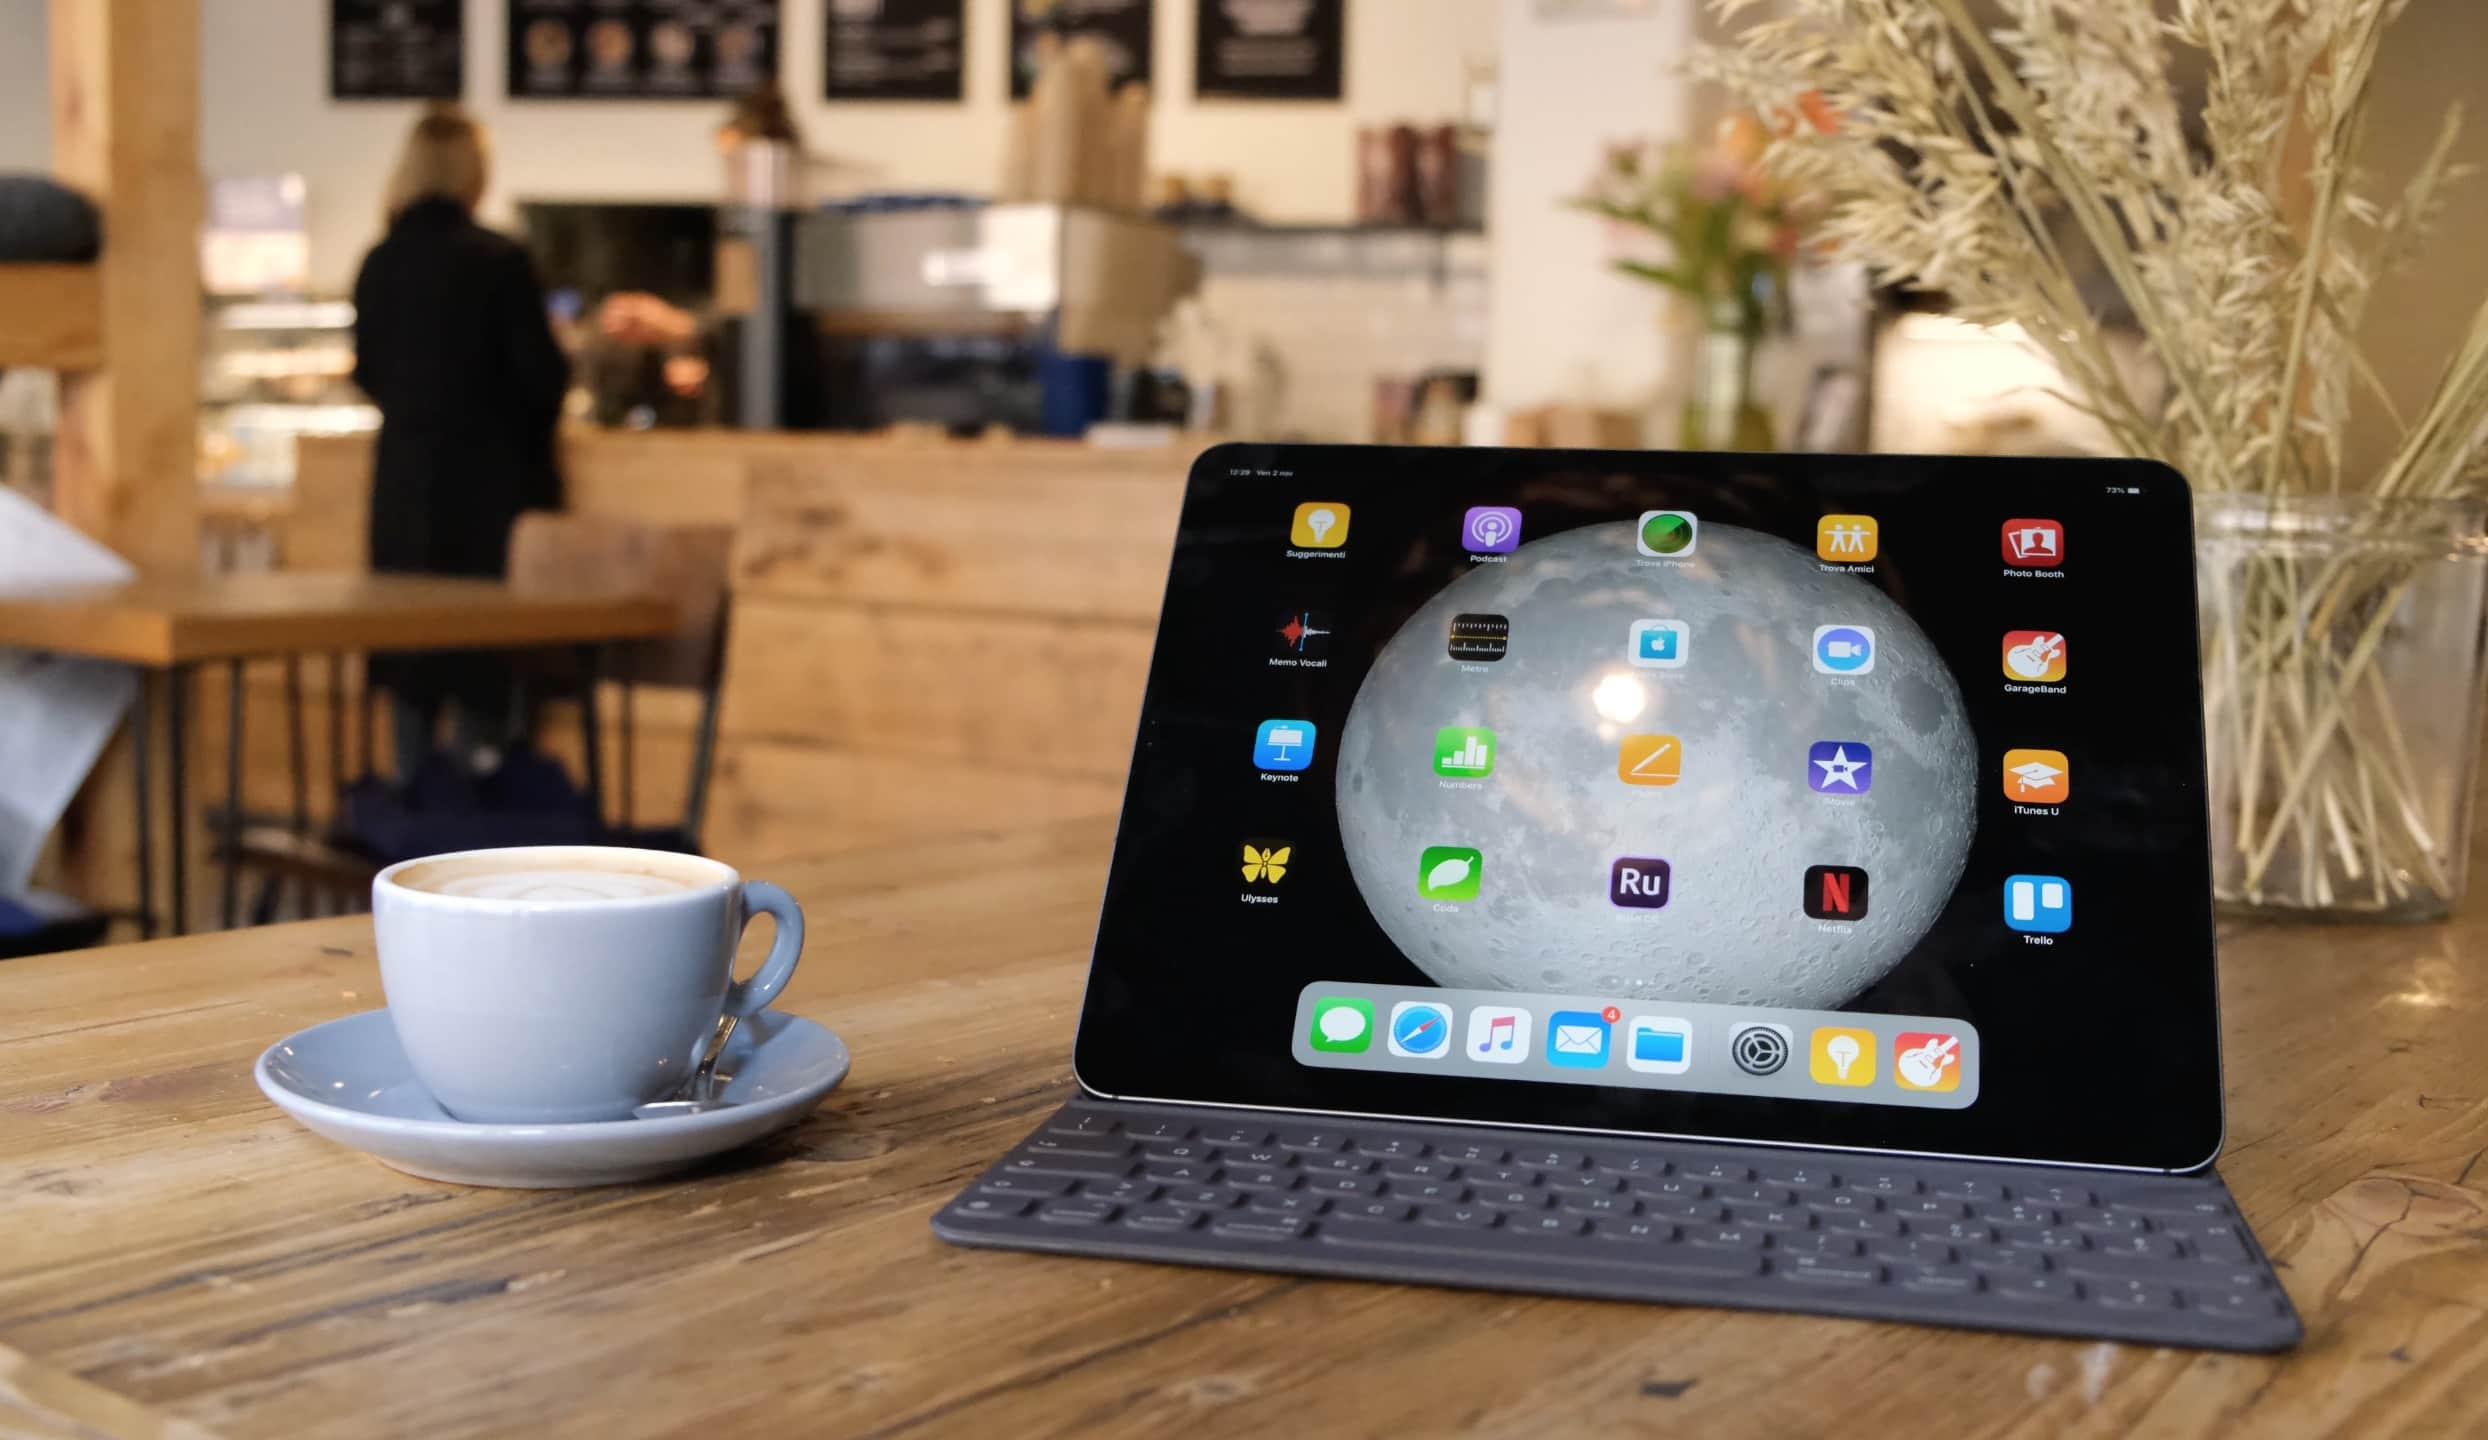 The Smart Keyboard Folio turns the iPad into a laptop, but there are better options.